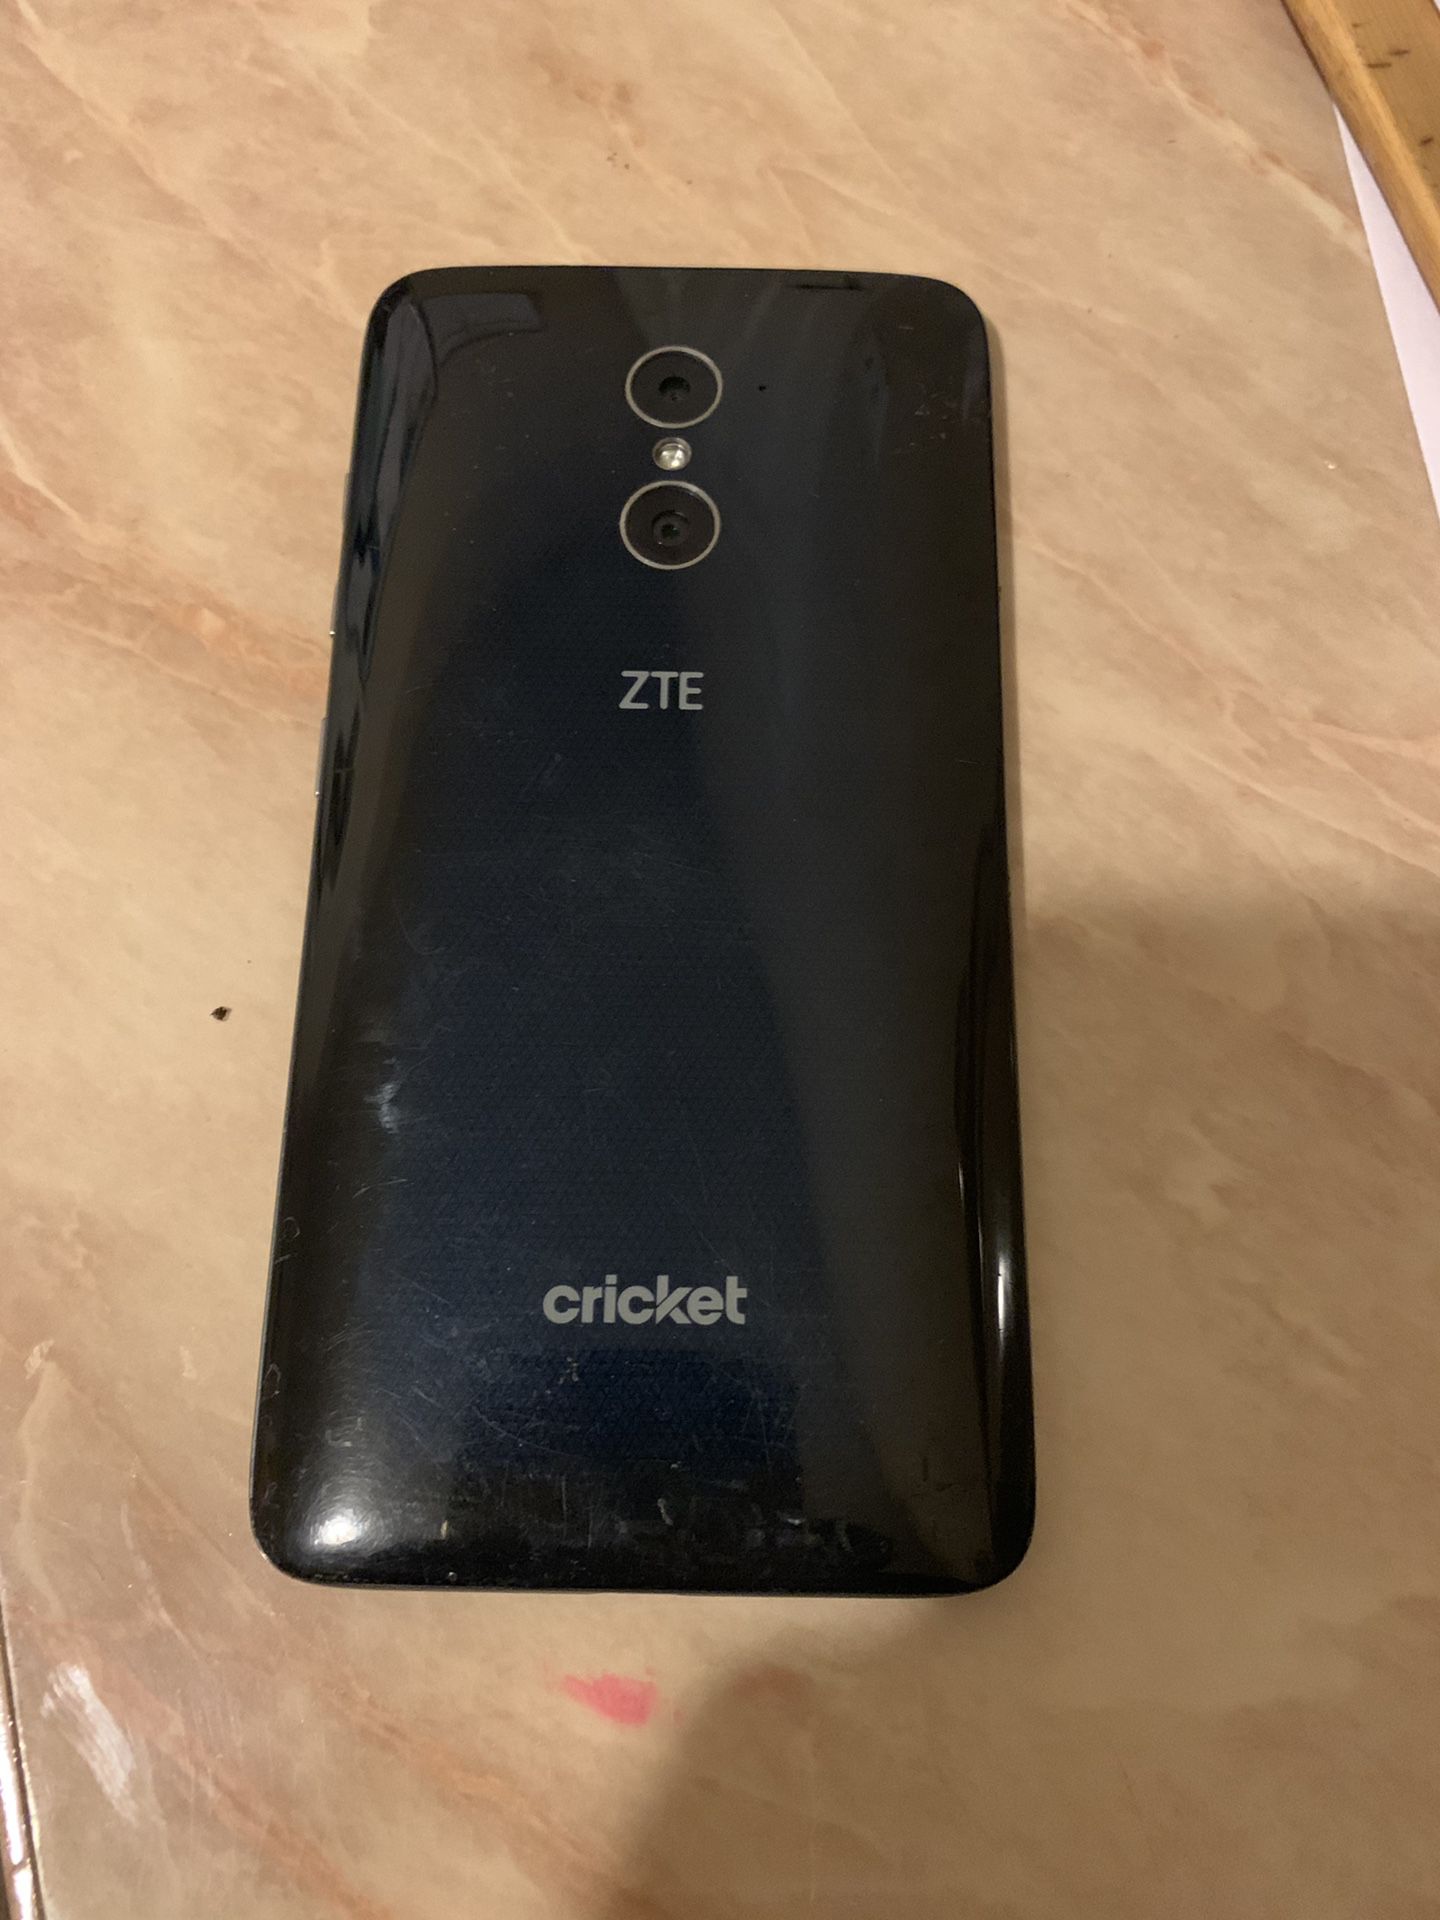 Zte cell phone for sell broken screen